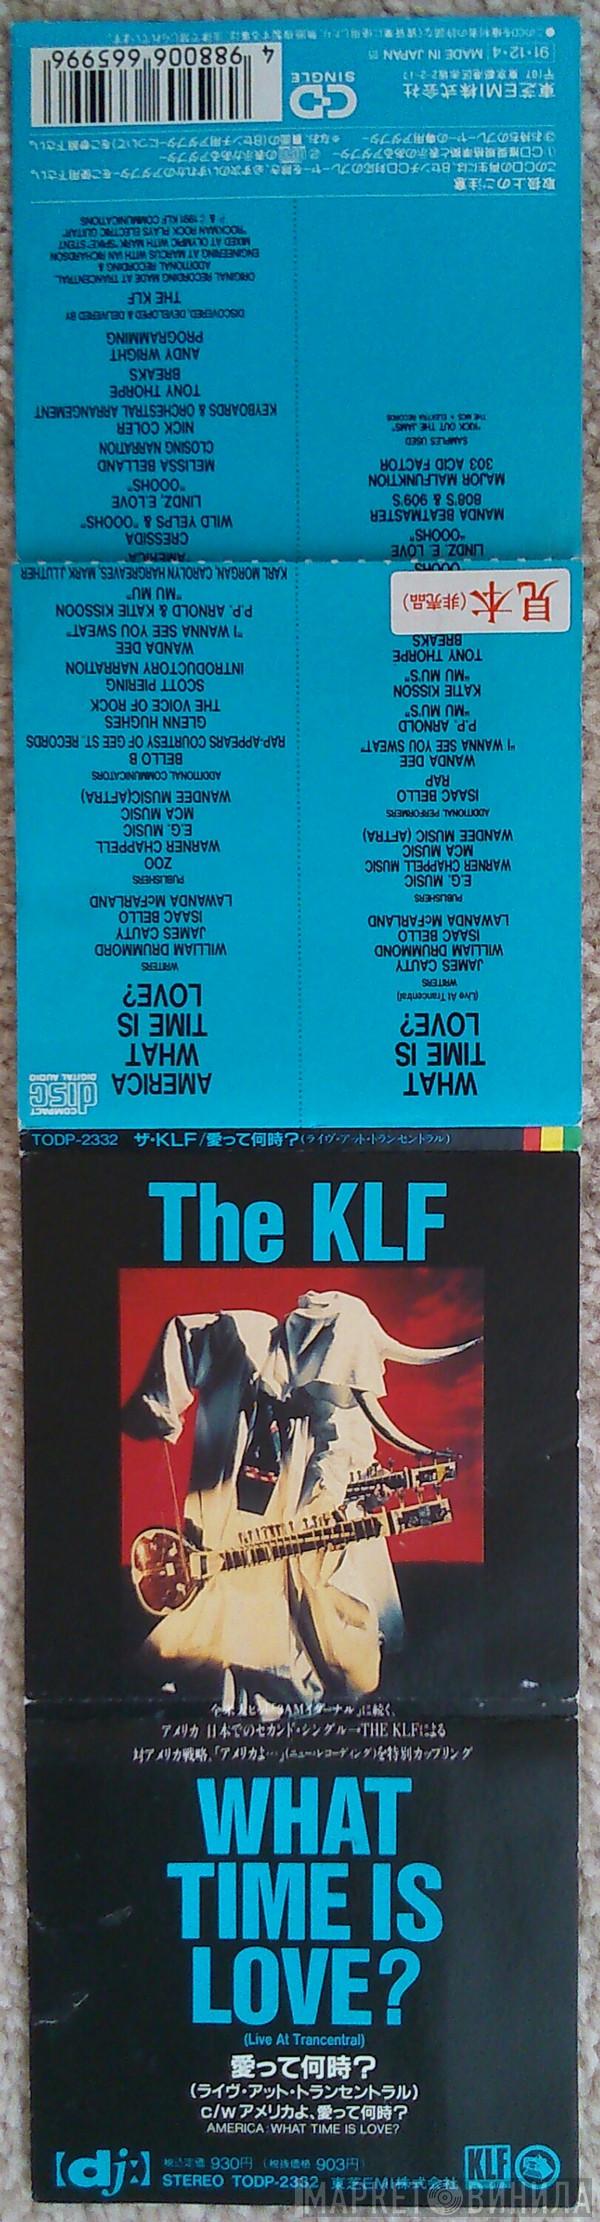  The KLF  - What Time Is Love?